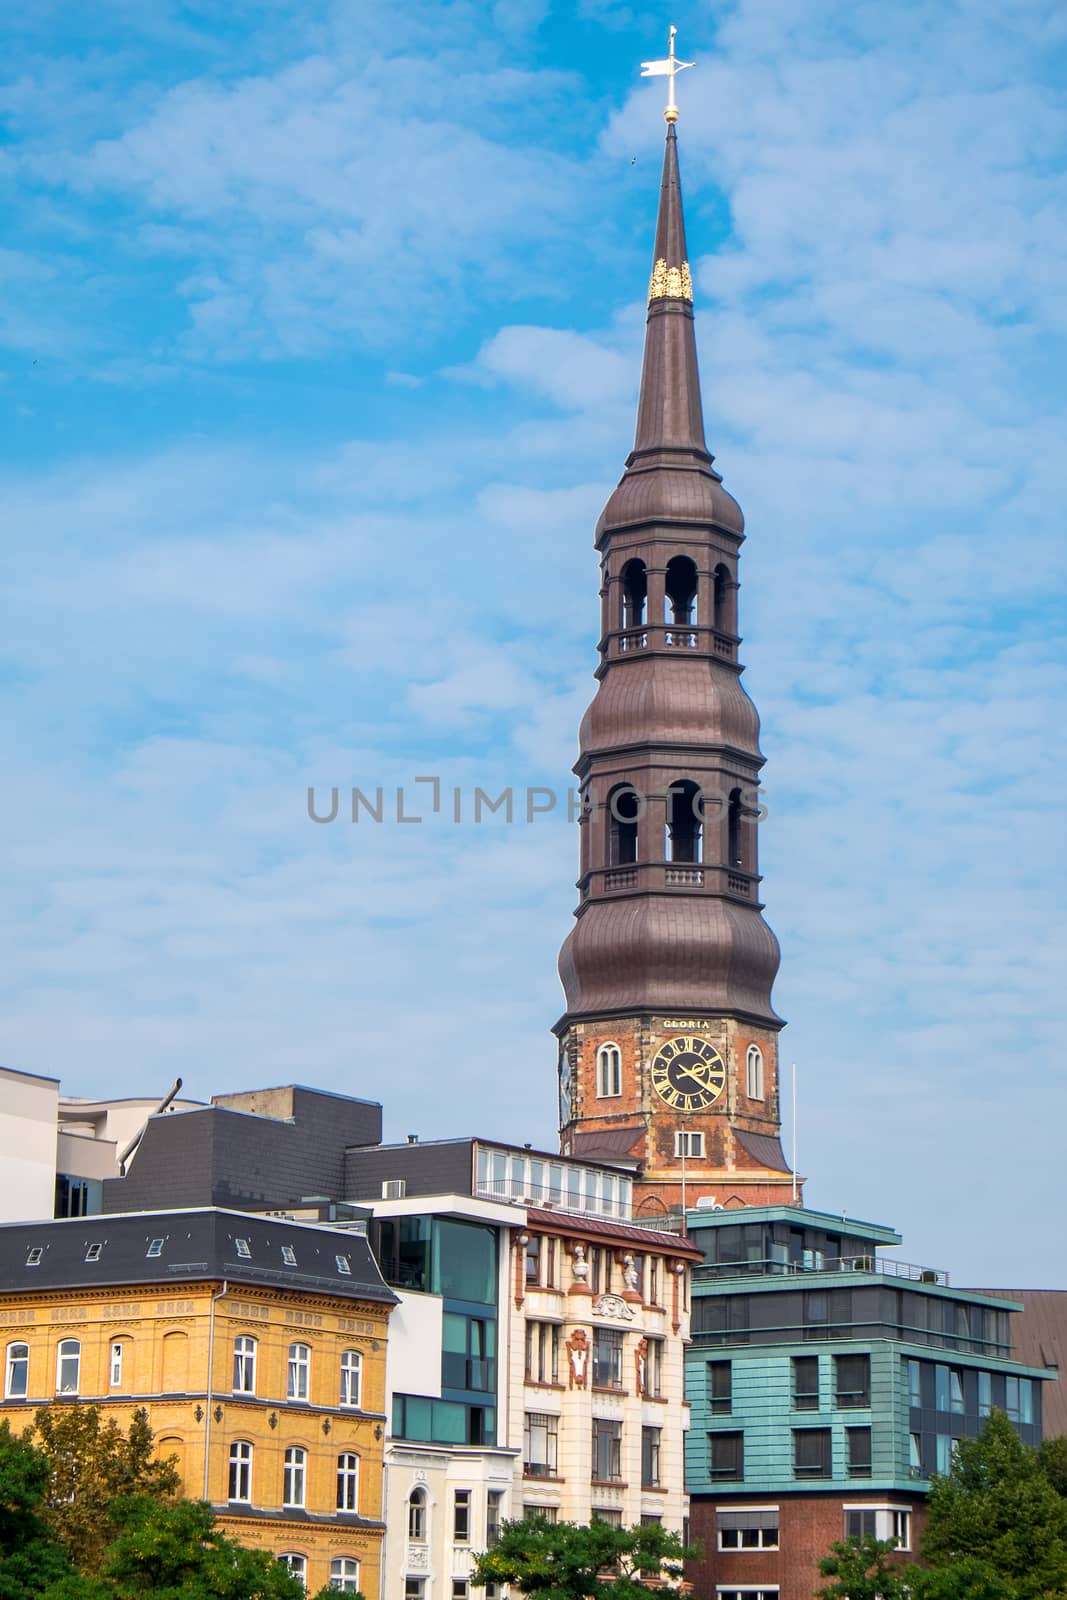 Church and houses in Hamburg by elxeneize